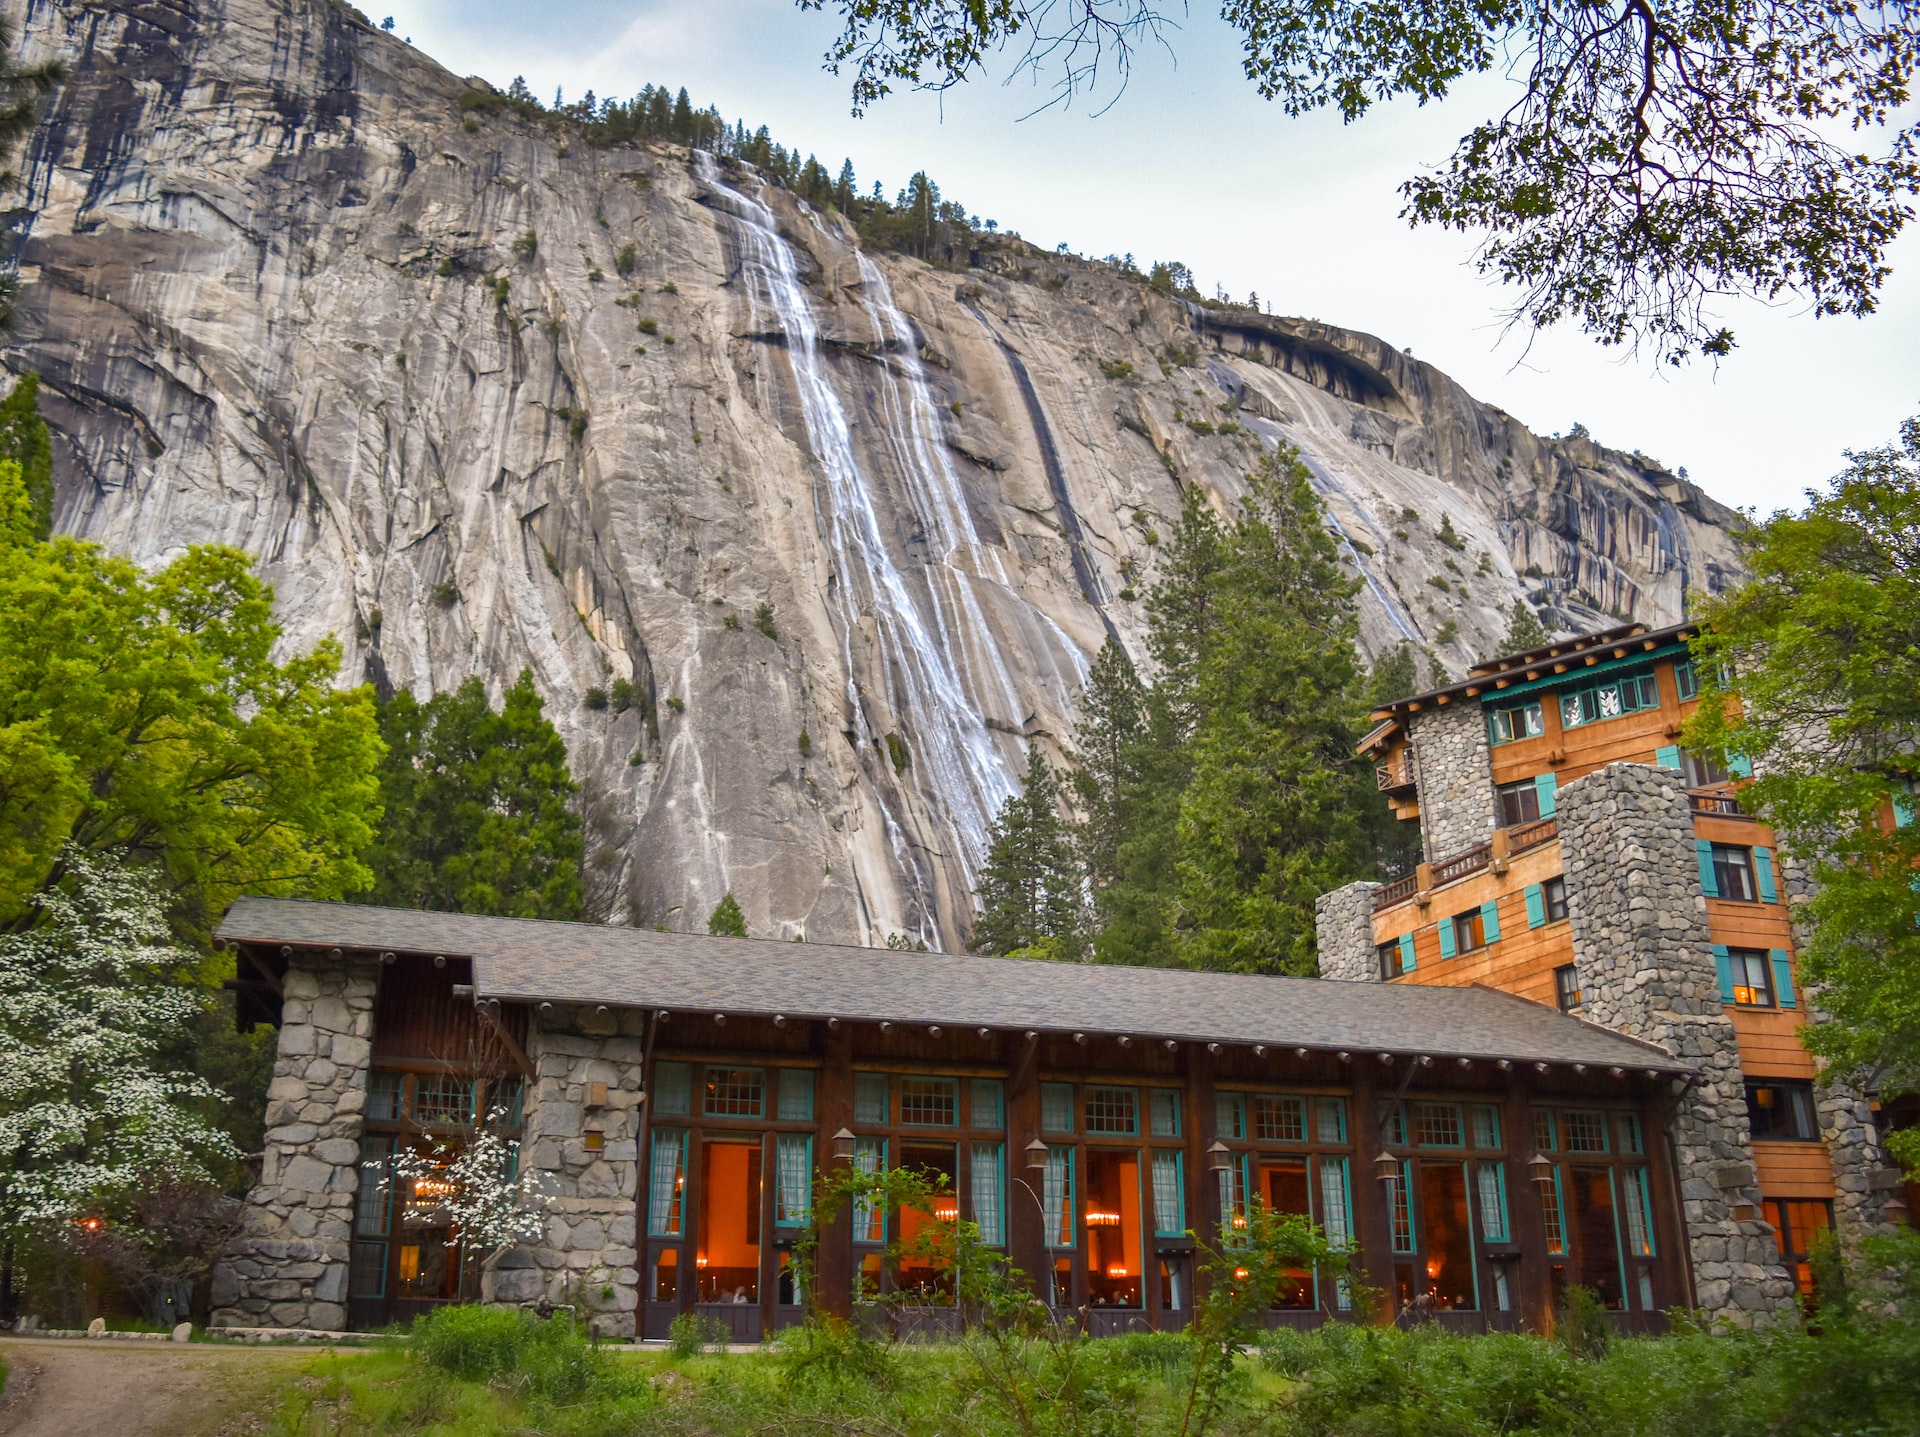 A seasonal waterfall that spills down the face of the Royal Arches wall in Yosemite Valley.